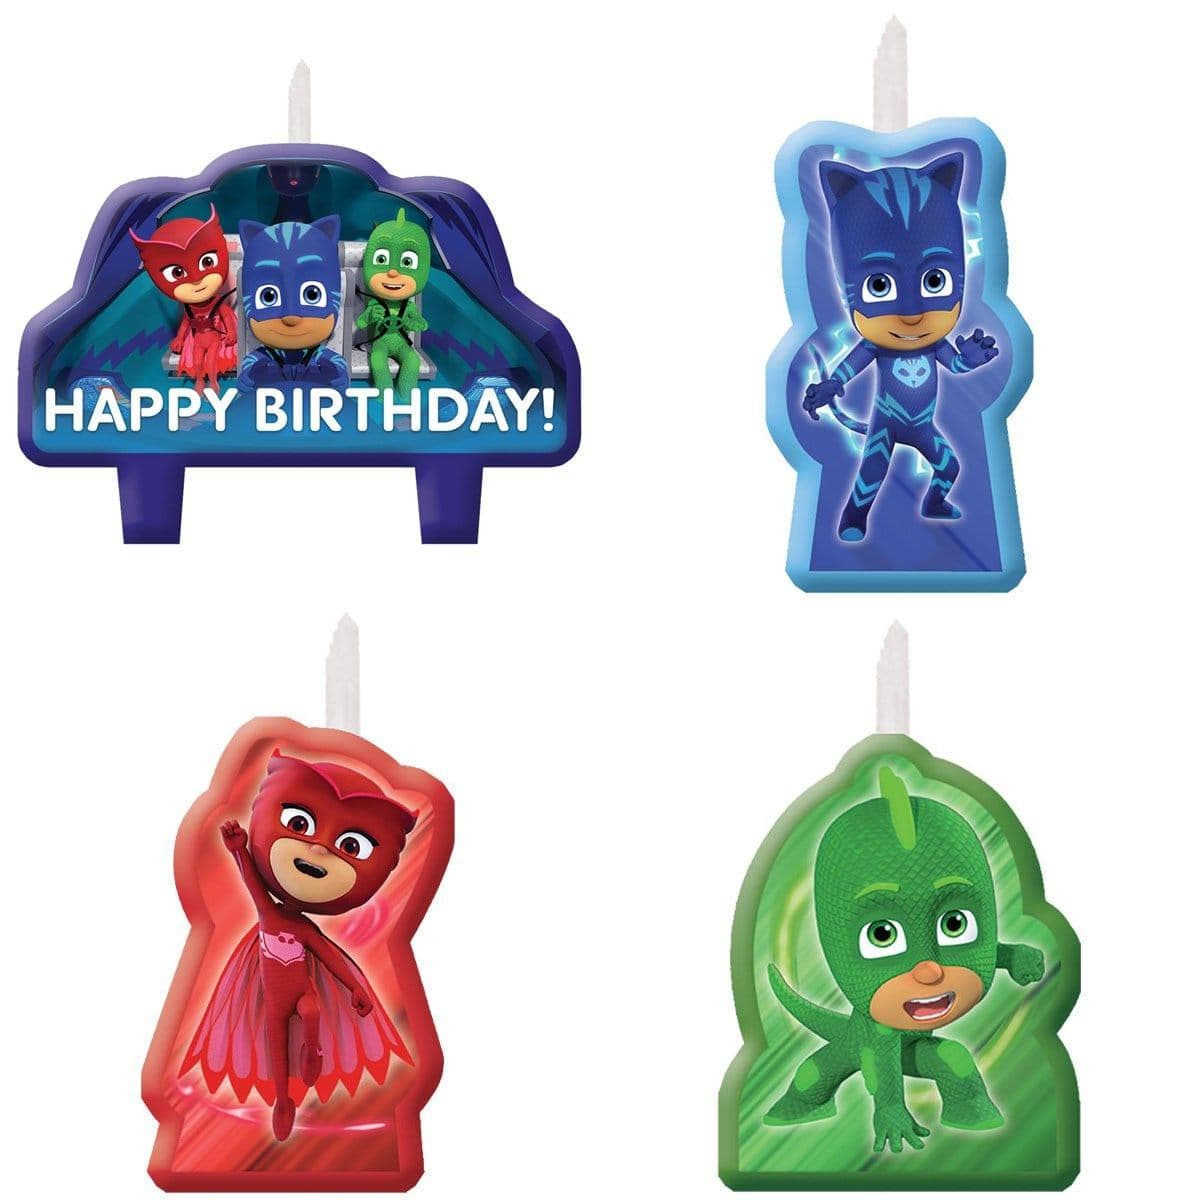 Buy Kids Birthday PJ Masks birthday candles, 4 per package sold at Party Expert